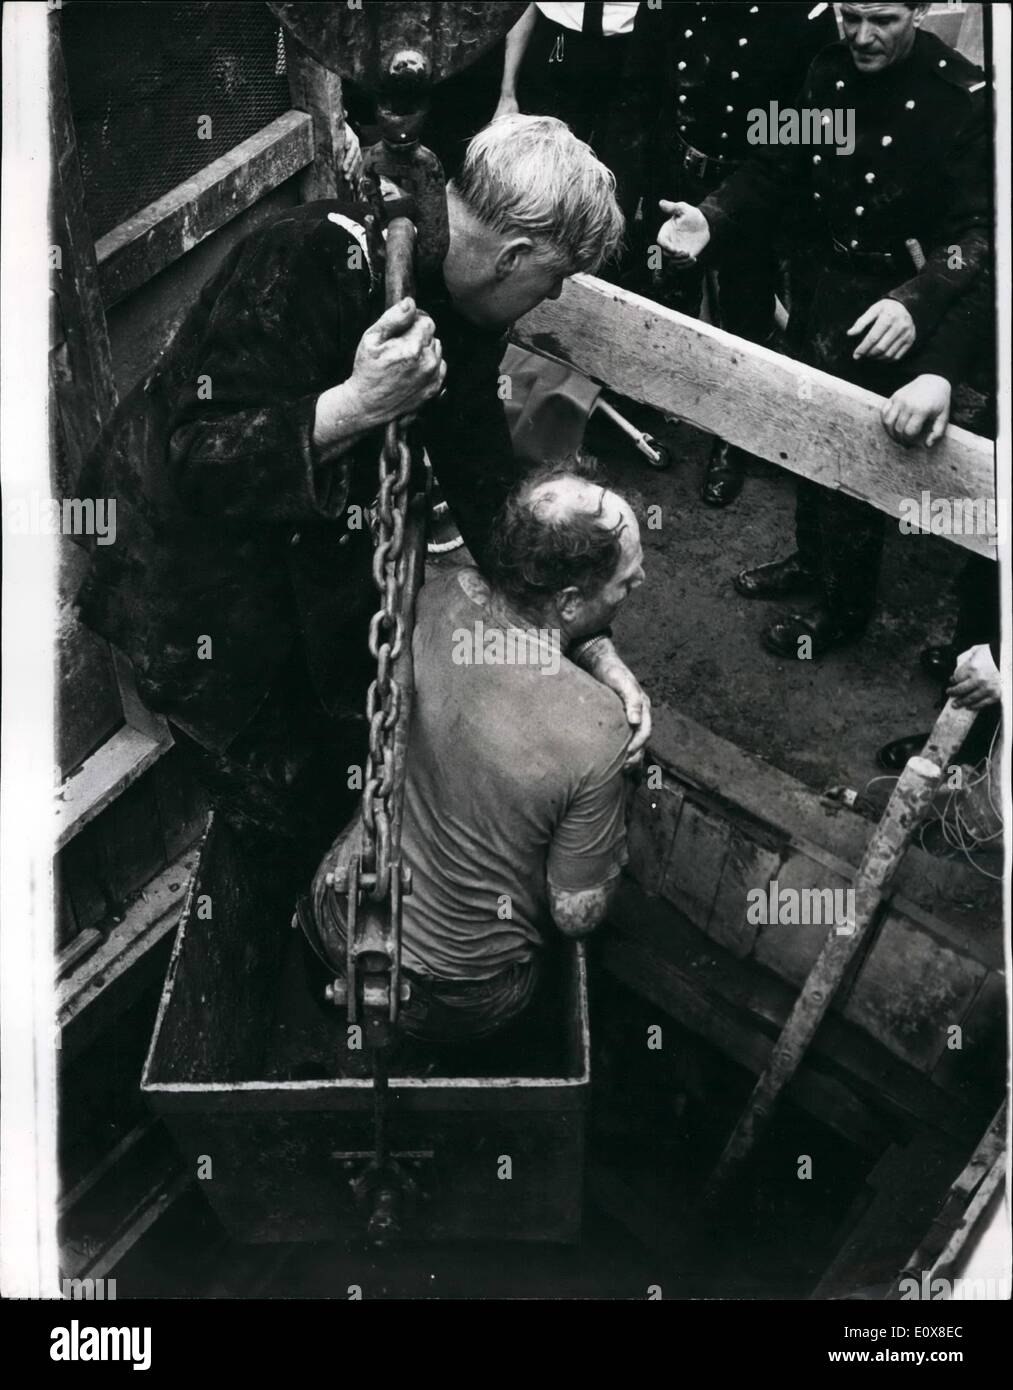 Aug. 08, 1965 - Gassed Workmen rescued from Sewer: Five firemen were injured in a struggle 20ft. below ground yesterday as they Stock Photo